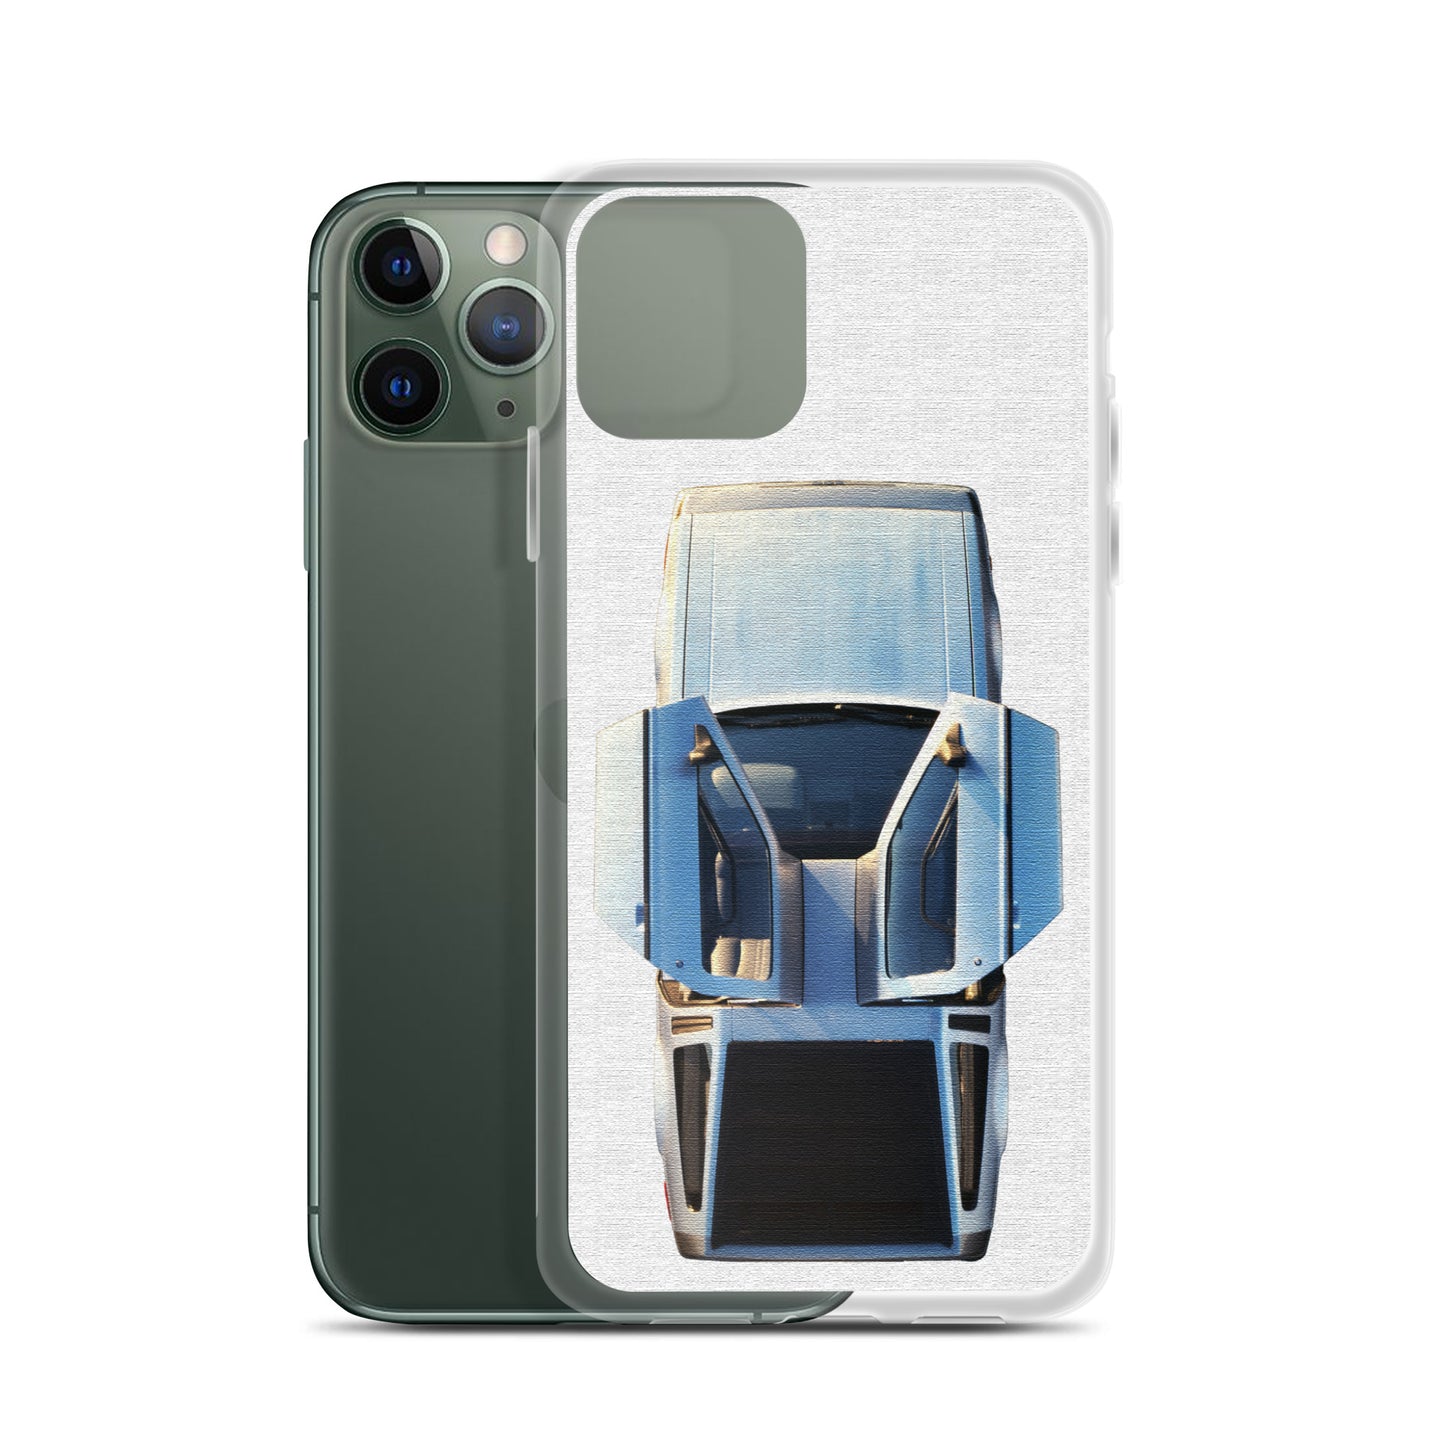 Canvas Gullwing iPhone Case